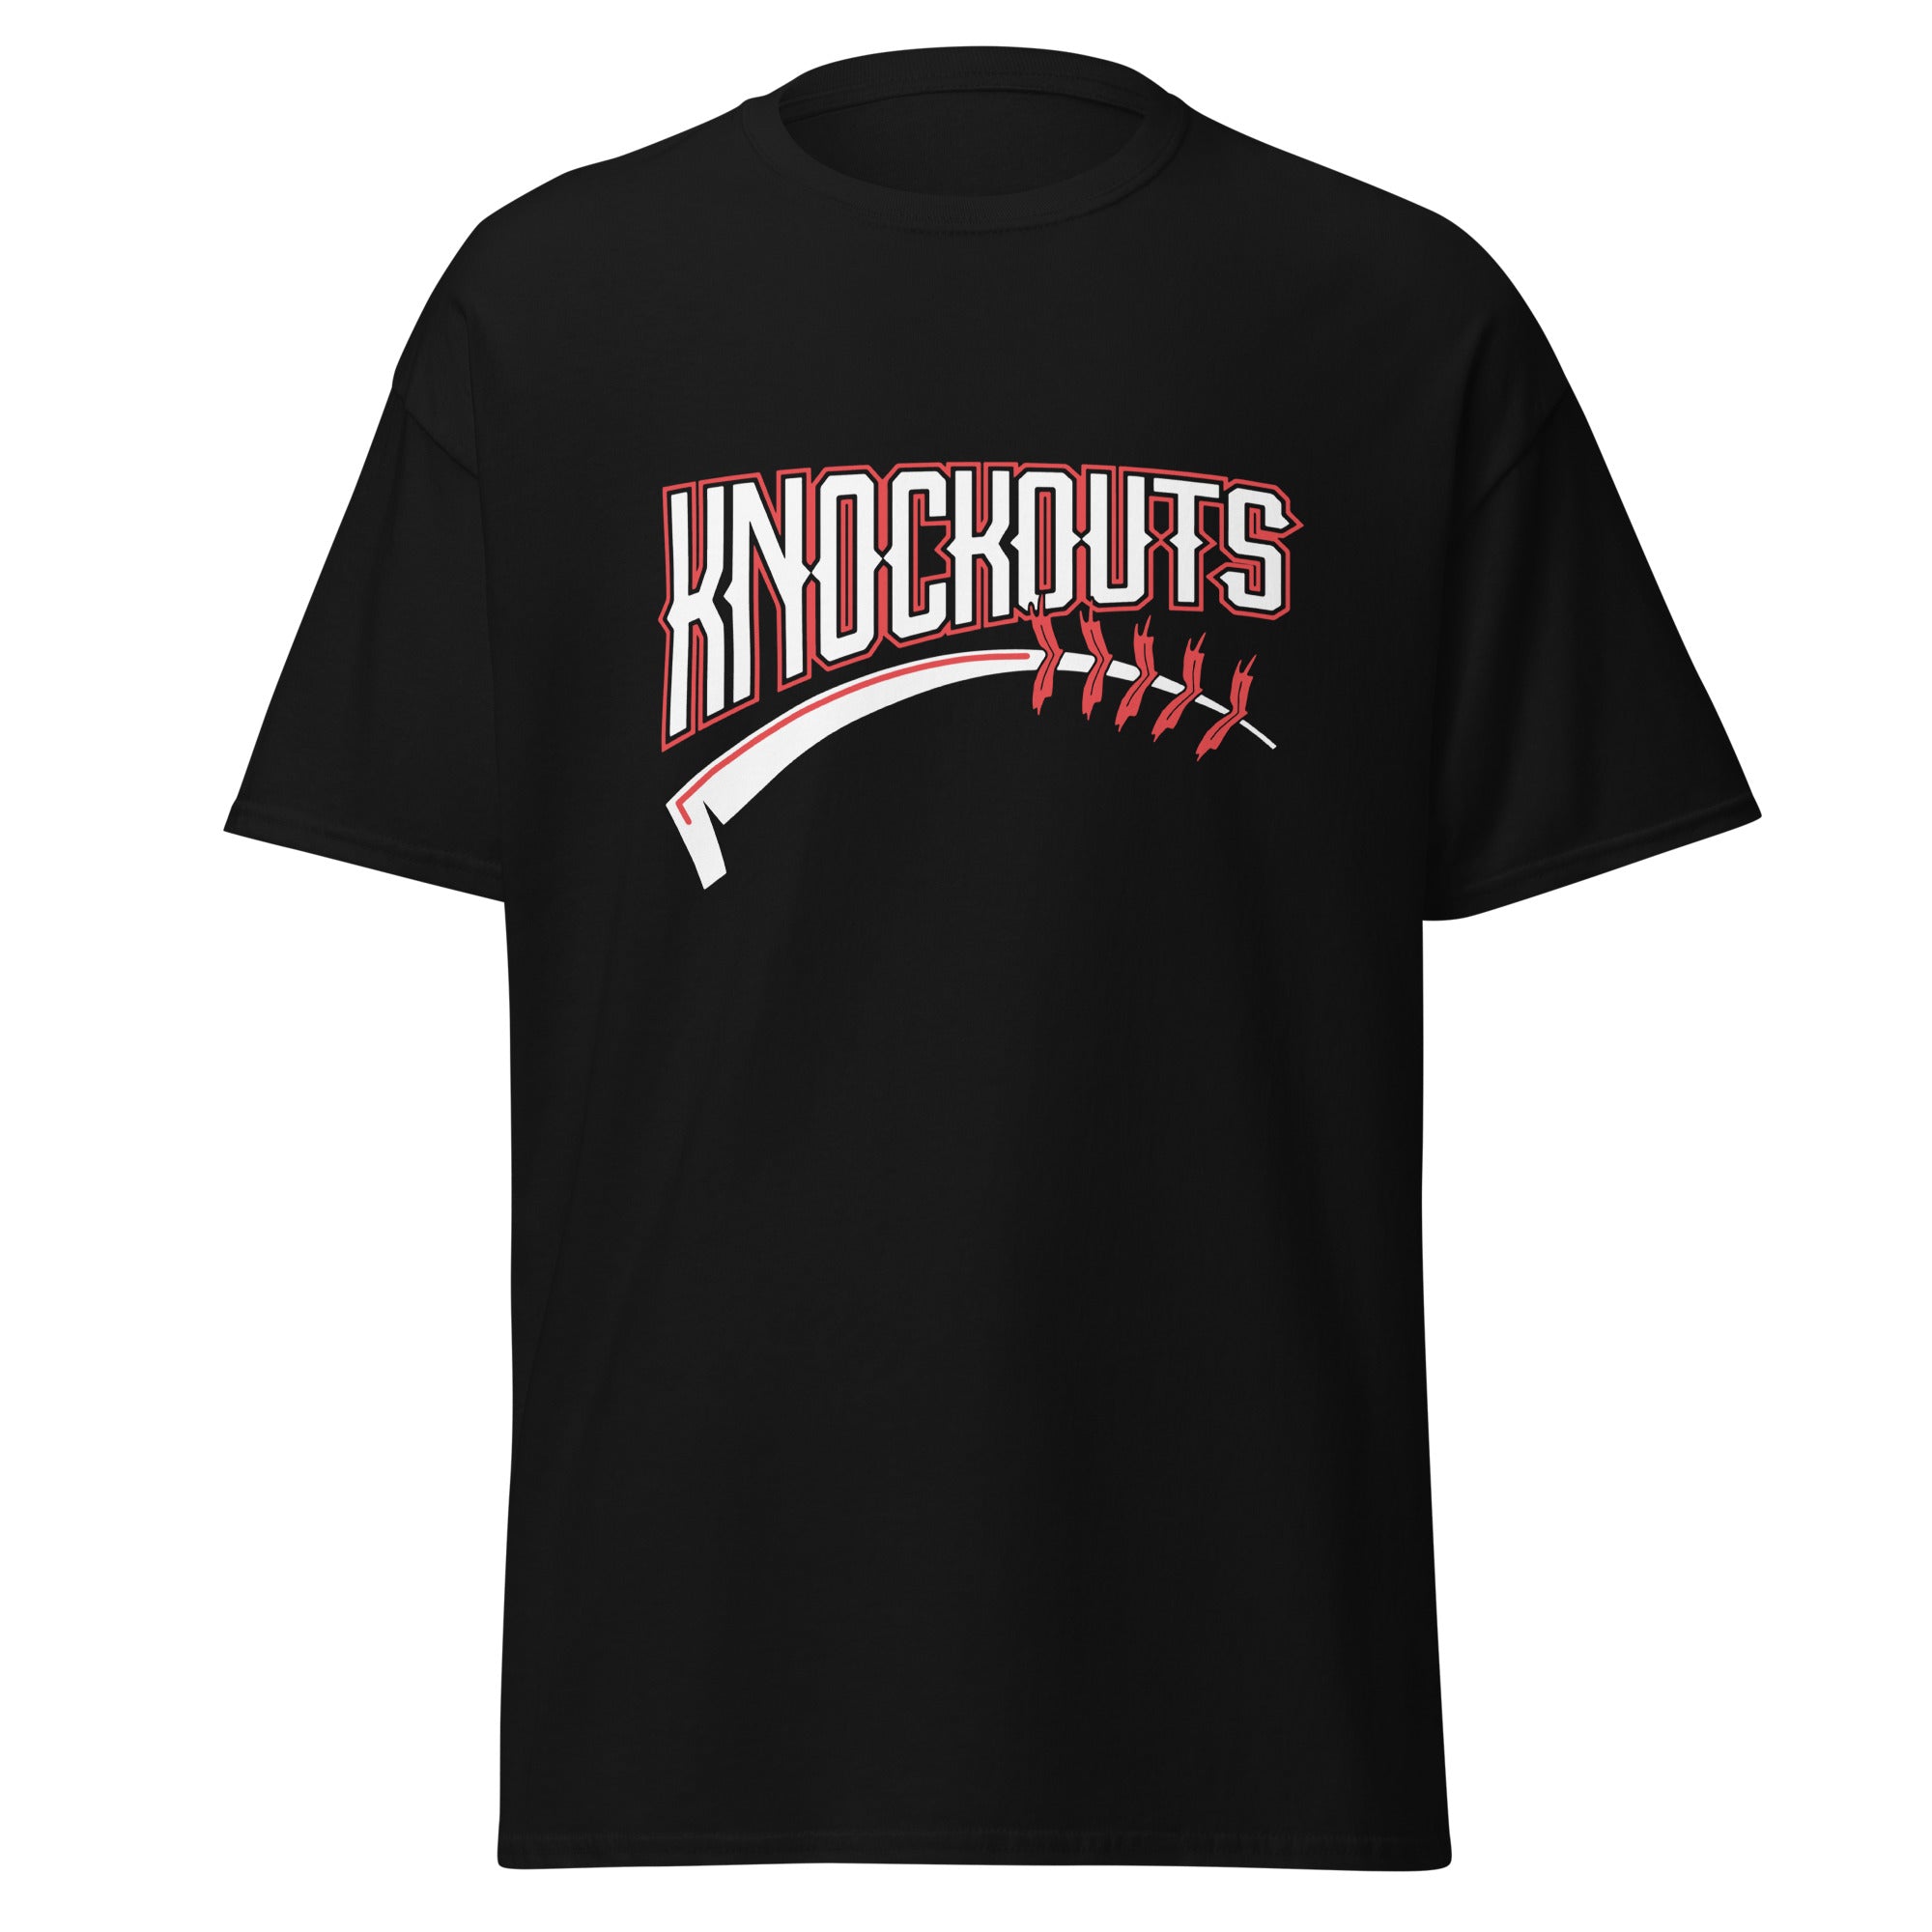 Knockouts Men's classic tee